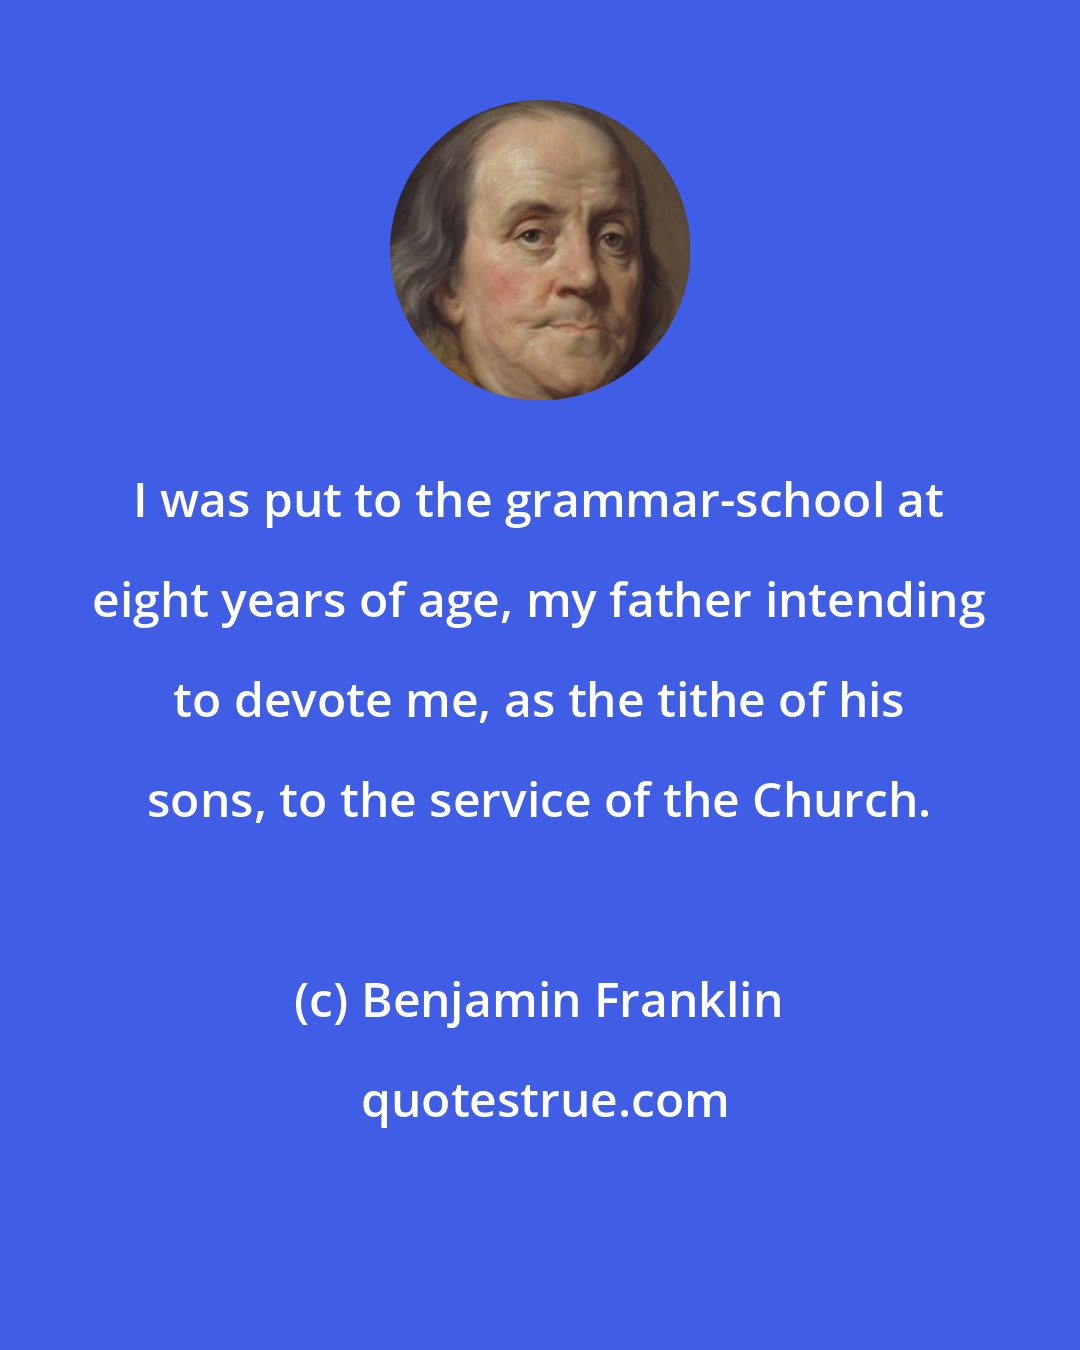 Benjamin Franklin: I was put to the grammar-school at eight years of age, my father intending to devote me, as the tithe of his sons, to the service of the Church.